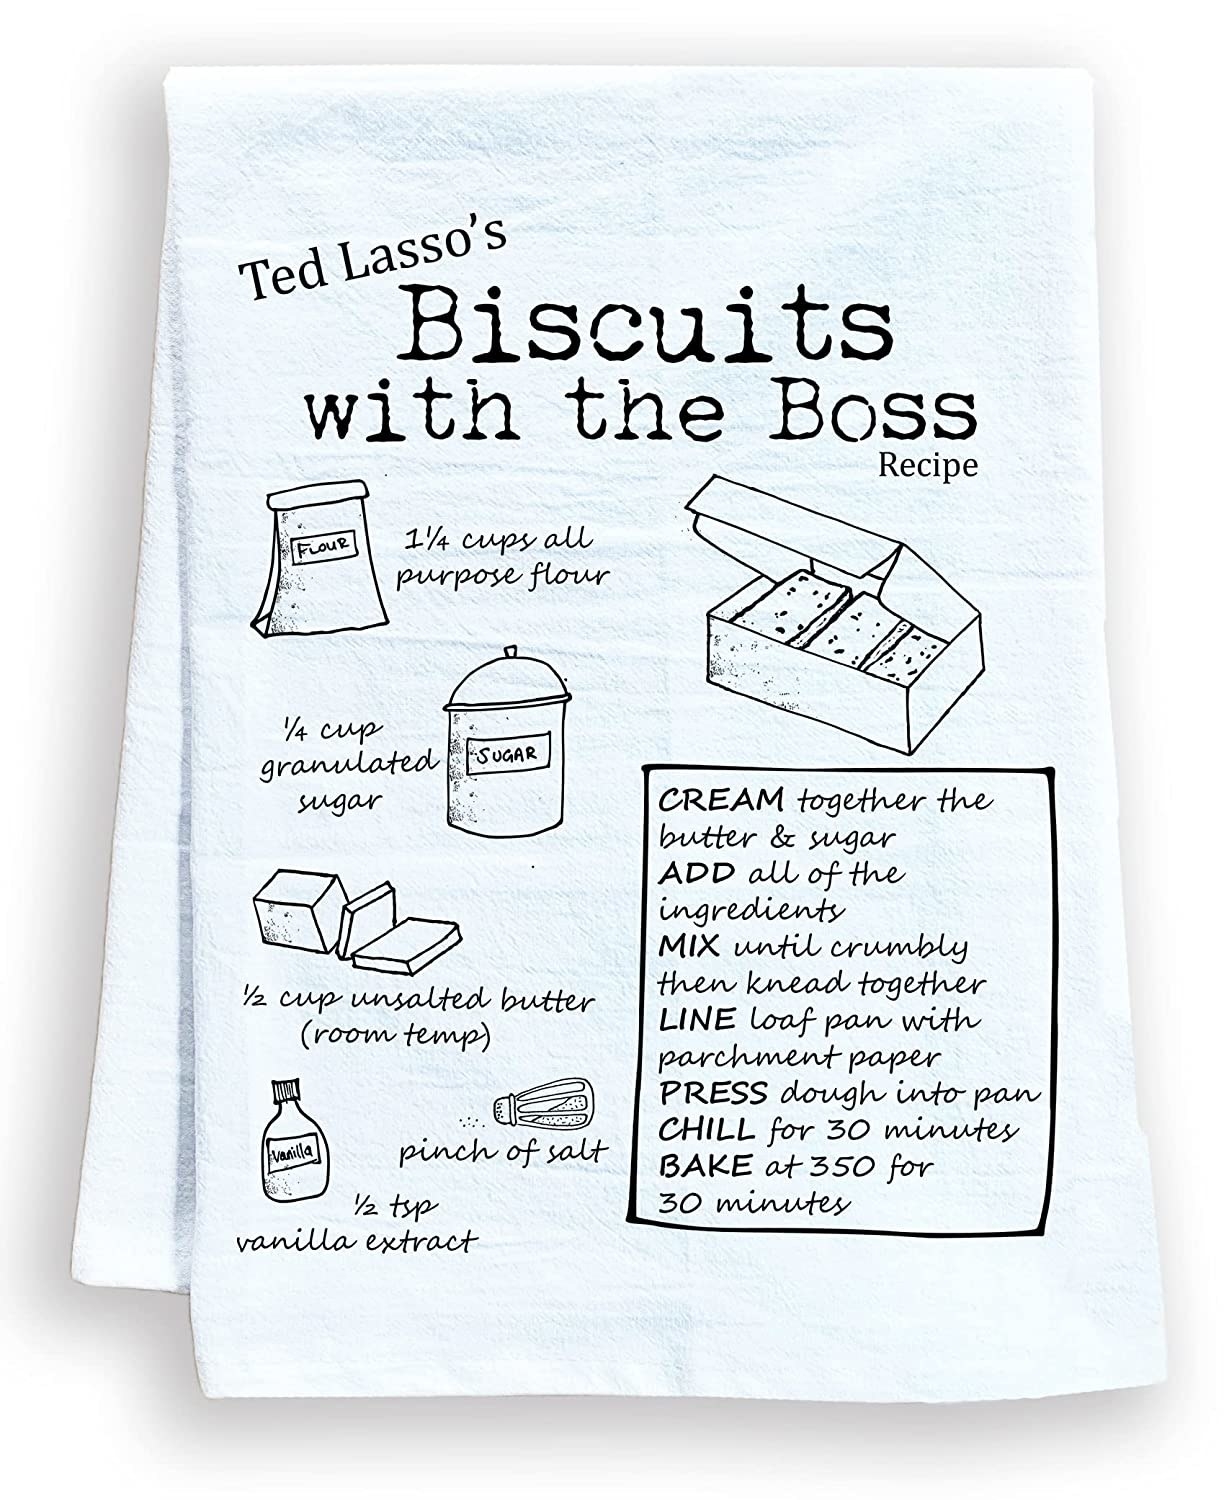 The white Biscuits With The Boss dish towel